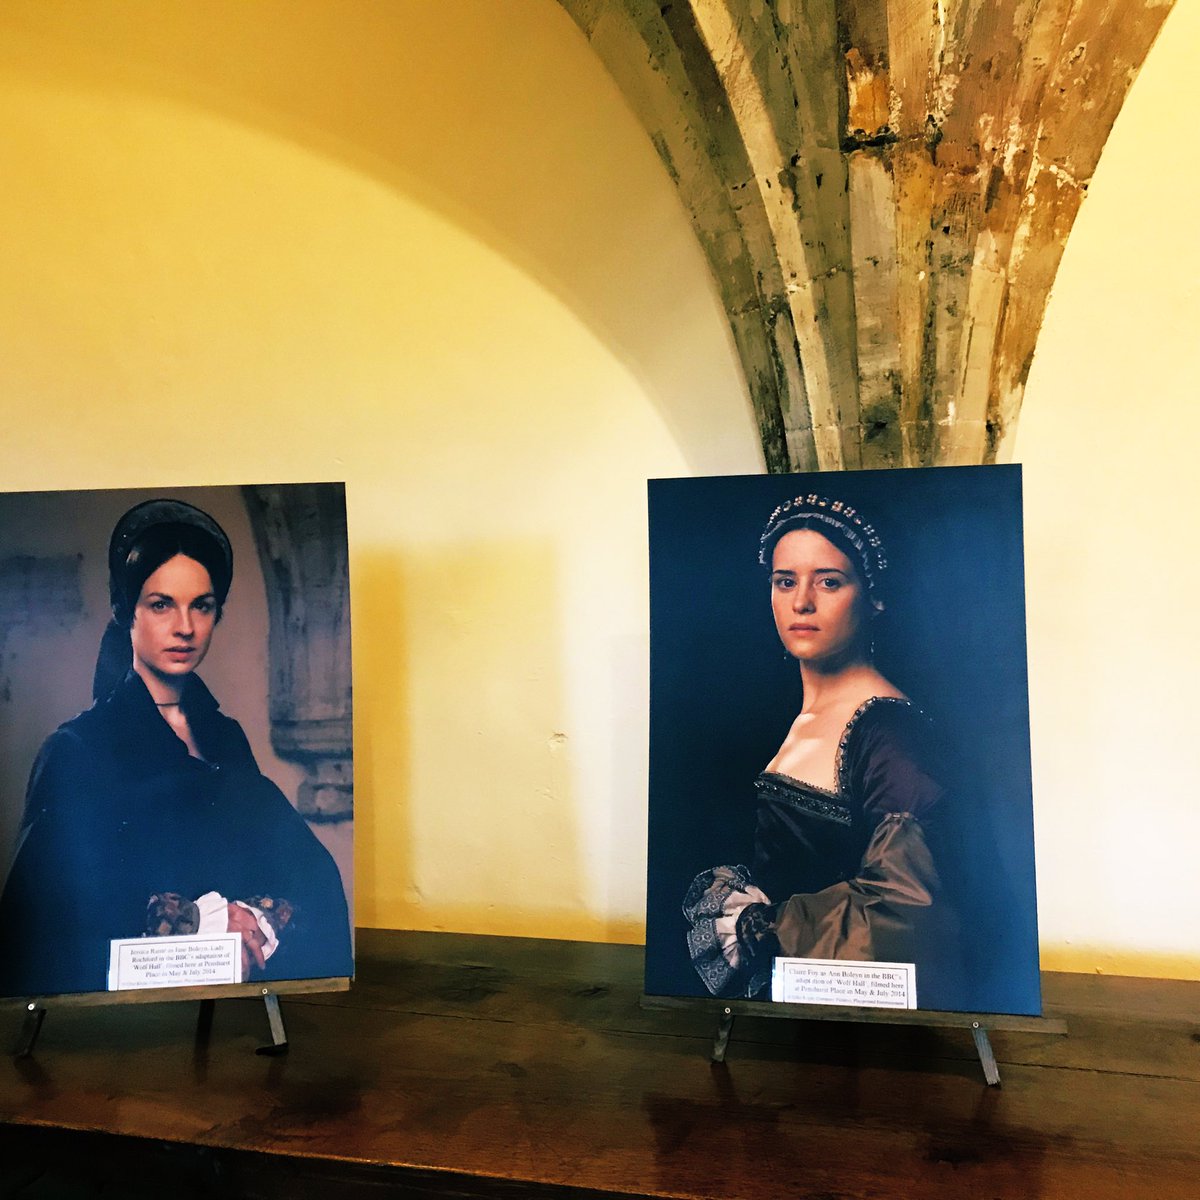 Went creeping into the crypt at @PenshurstPlace & found #Tudor costumes on display from 🎥 “The Other Boleyn Girl” (2008). It was used as the main location for filming. “Wolf Hall” was also filmed here in 2014. #HenryVIII #AnneBoleyn